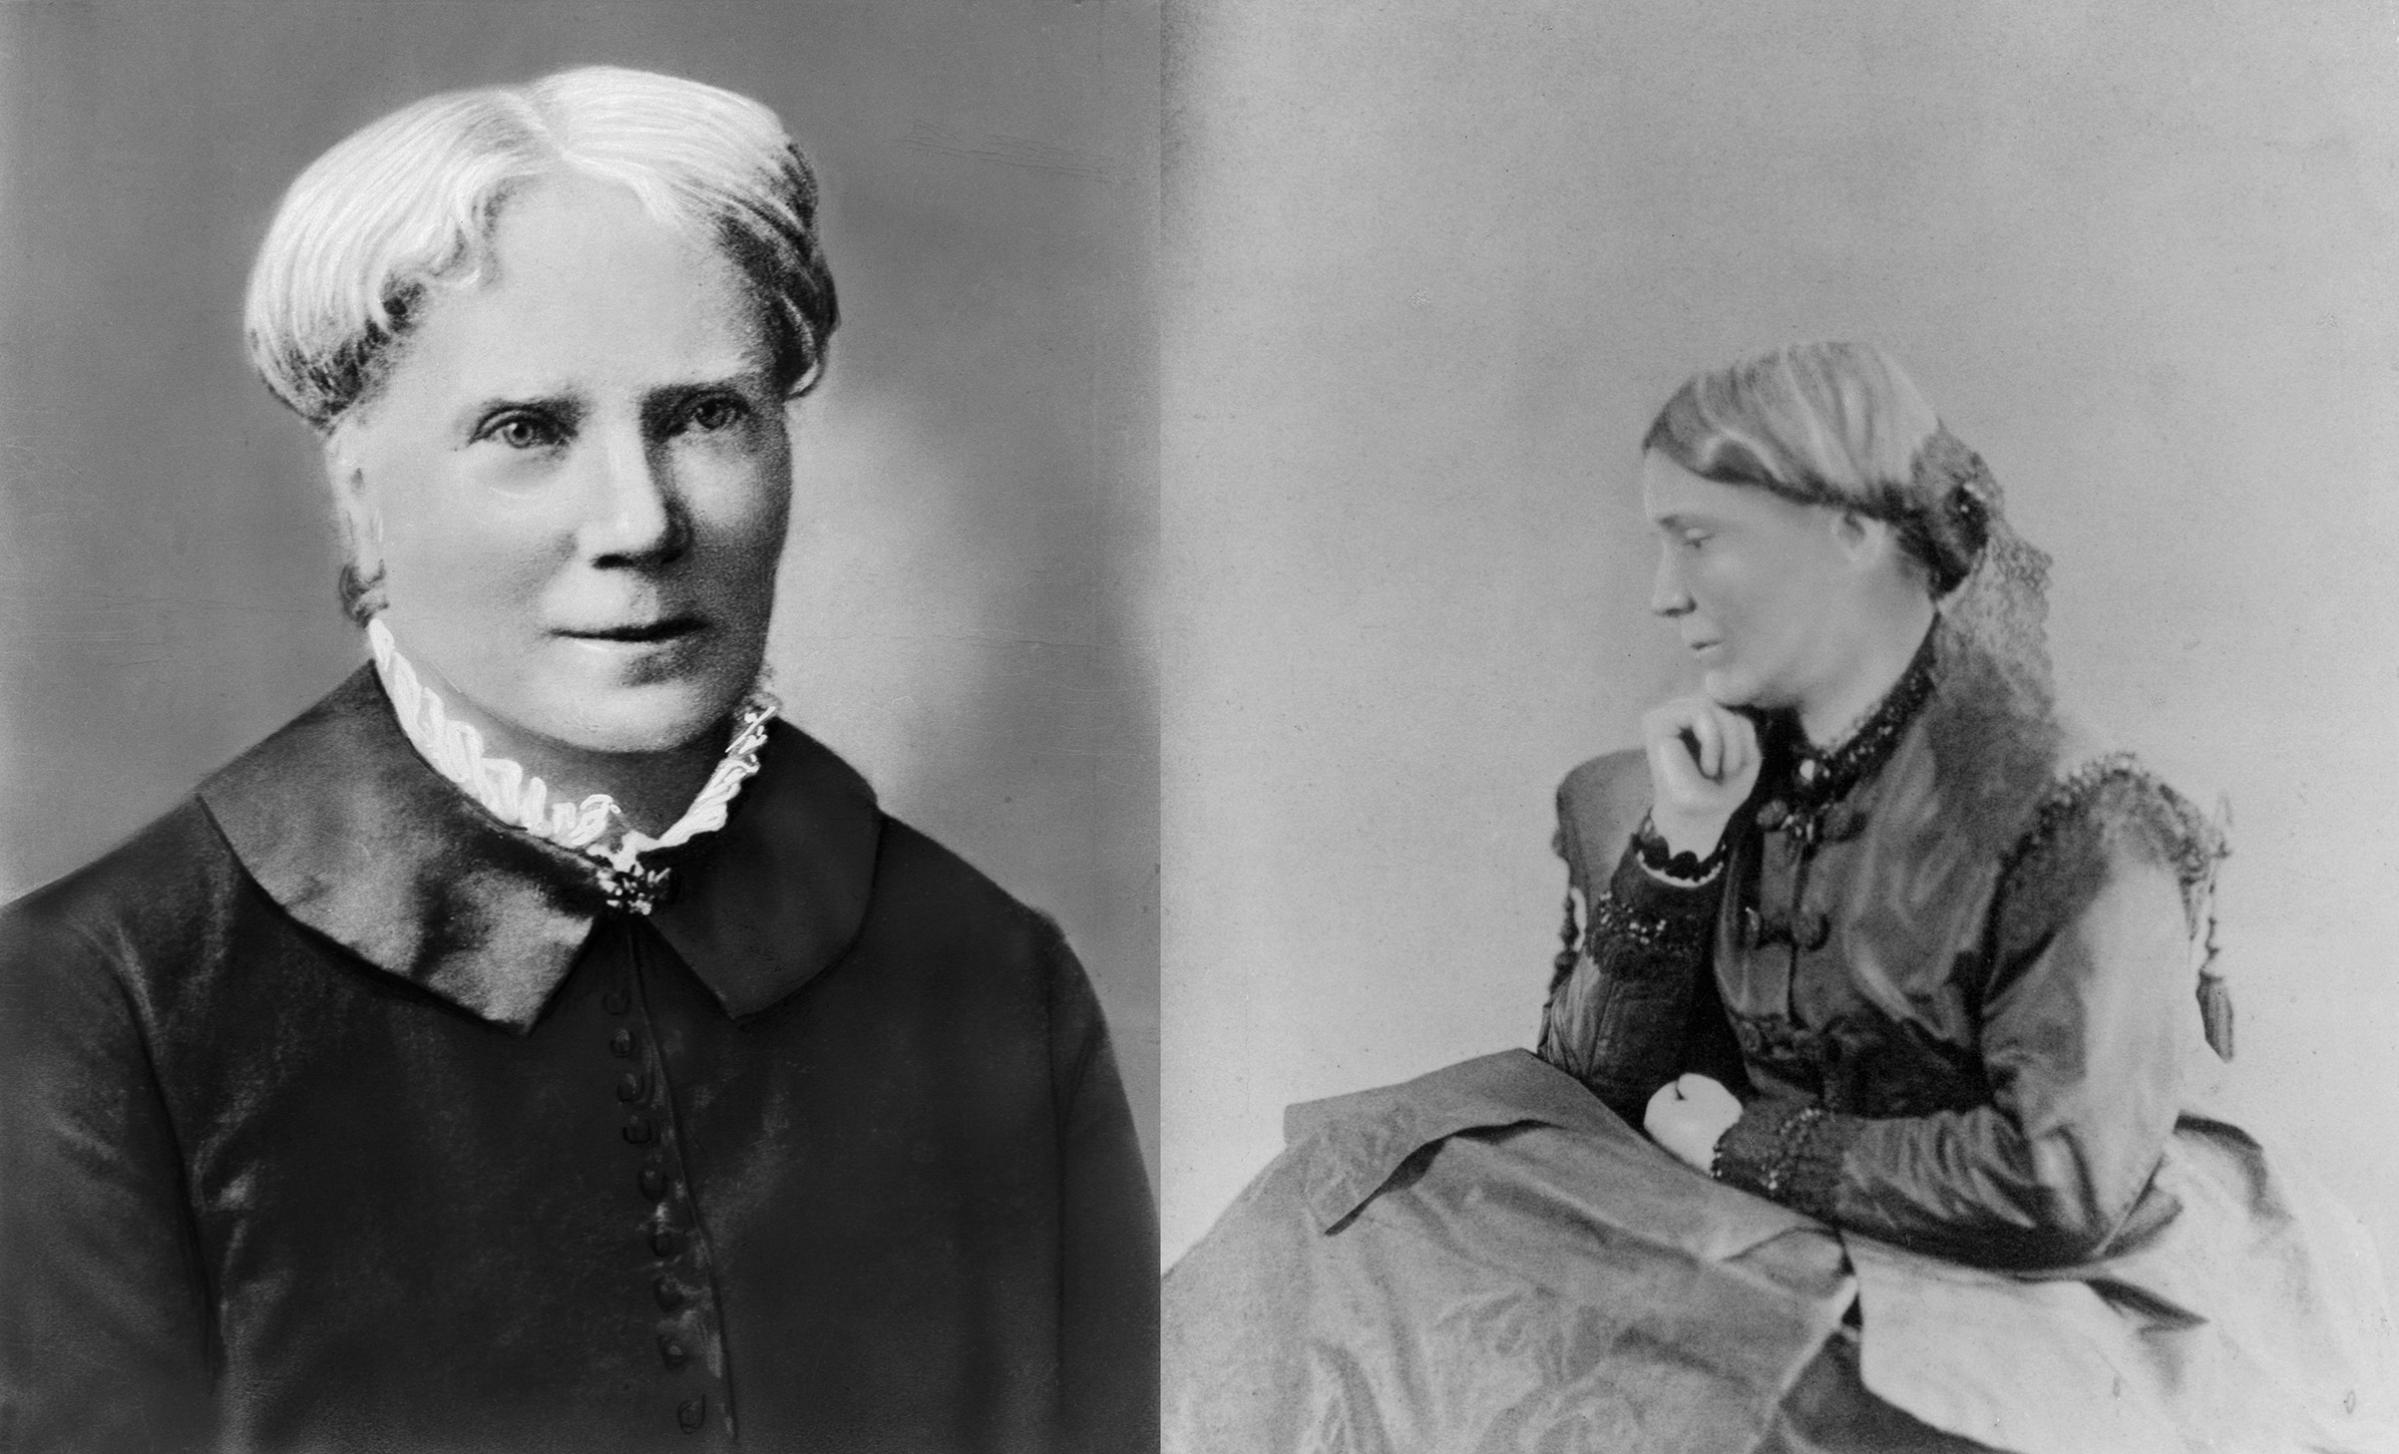 English born doctors and sisters Elizabeth Blackwell (L) and Emily Blackwell (R). Both circa 1860s.